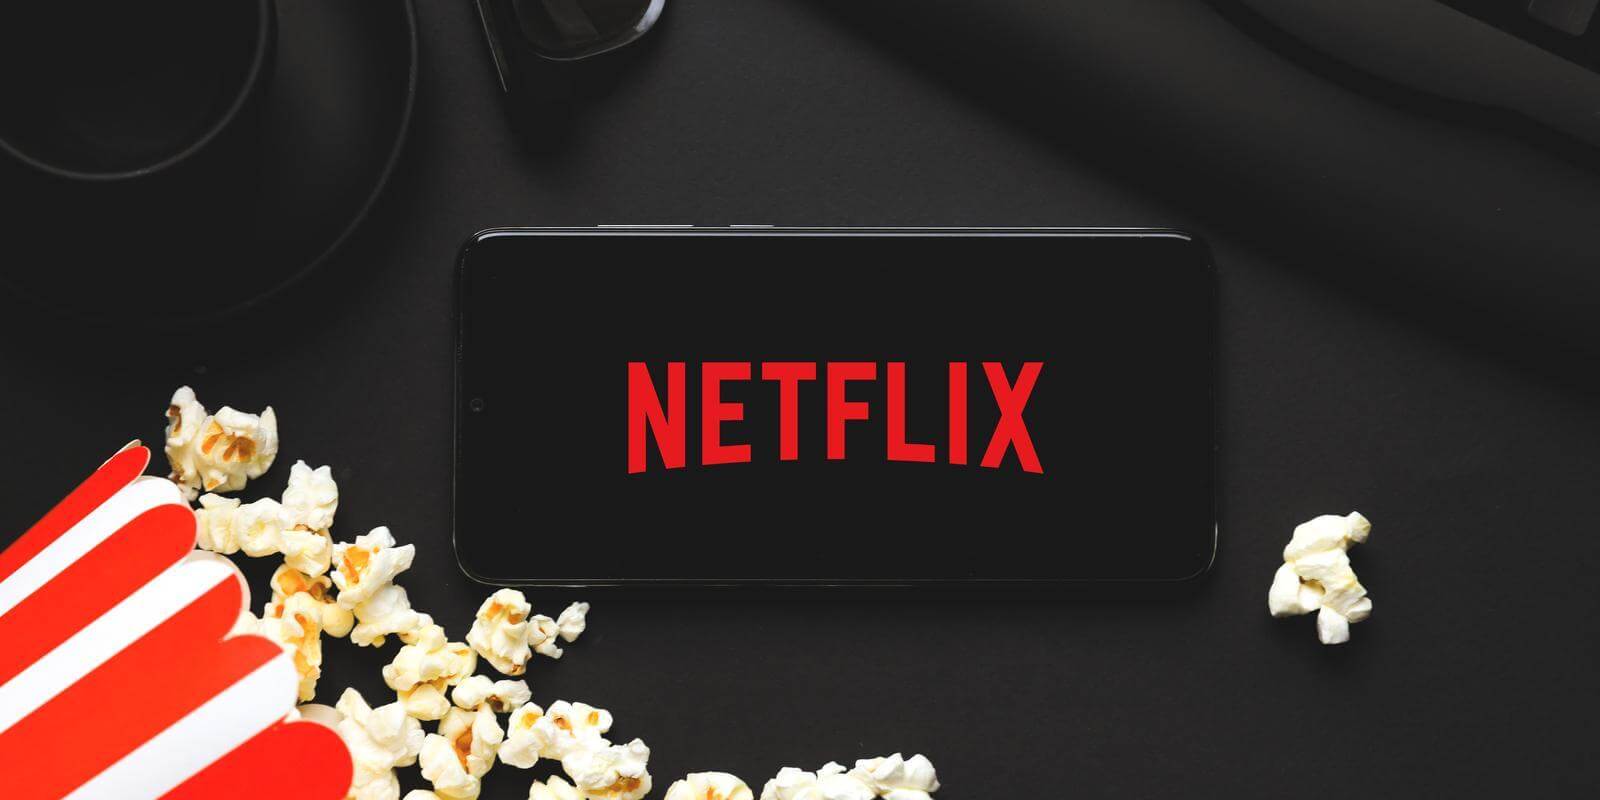 How to Find New Content on Netflix